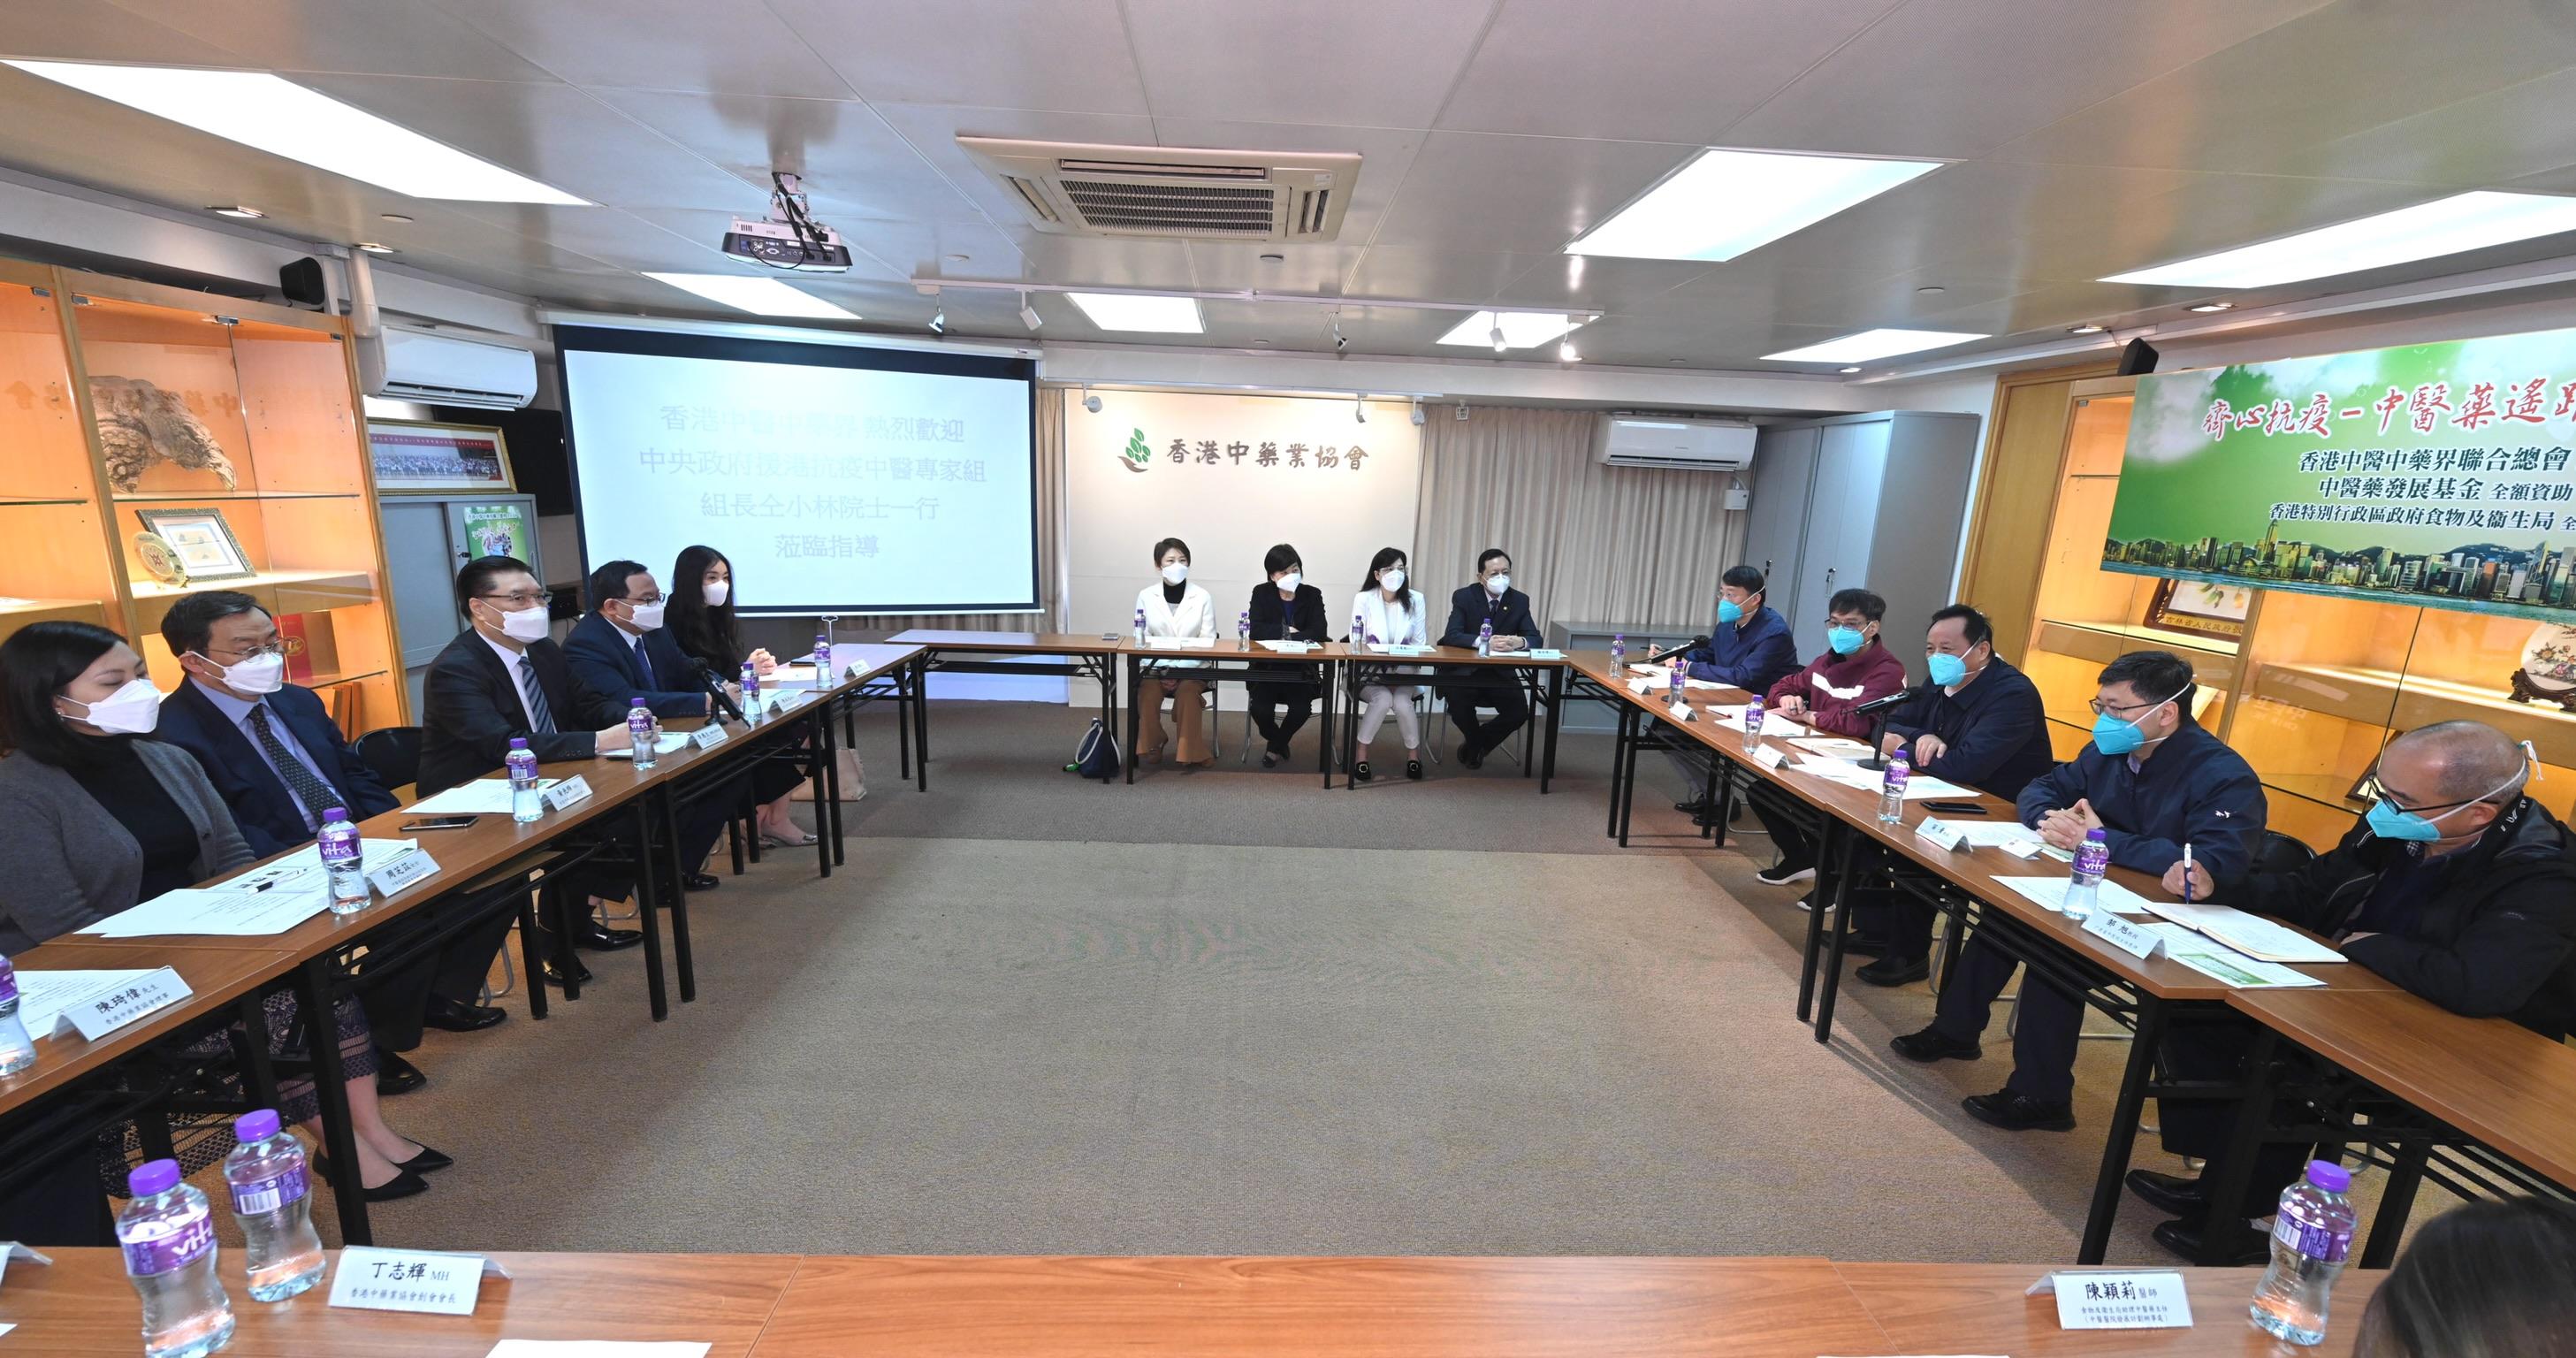 The expert group led by the leader of the Mainland Chinese medicine expert group of the Central Authorities, Mr Tong Xiaolin (third right); meets with the President of the Federation of the Hong Kong Chinese Medicine Practitioners and Chinese Medicines Traders Association, Mr Tommy Li (third left); the Chairman of the Federation, Professor Chan Wing-kwong (fourth left); and several representatives from the Chinese medicine sector today (April 3), to learn about the work progress of the “Fight the Virus Together – Chinese Medicine Telemedicine Scheme”. The Head of the Chinese Medicine Unit of the Food and Health Bureau, Ms Ellen Chan (fifth left), also attended.